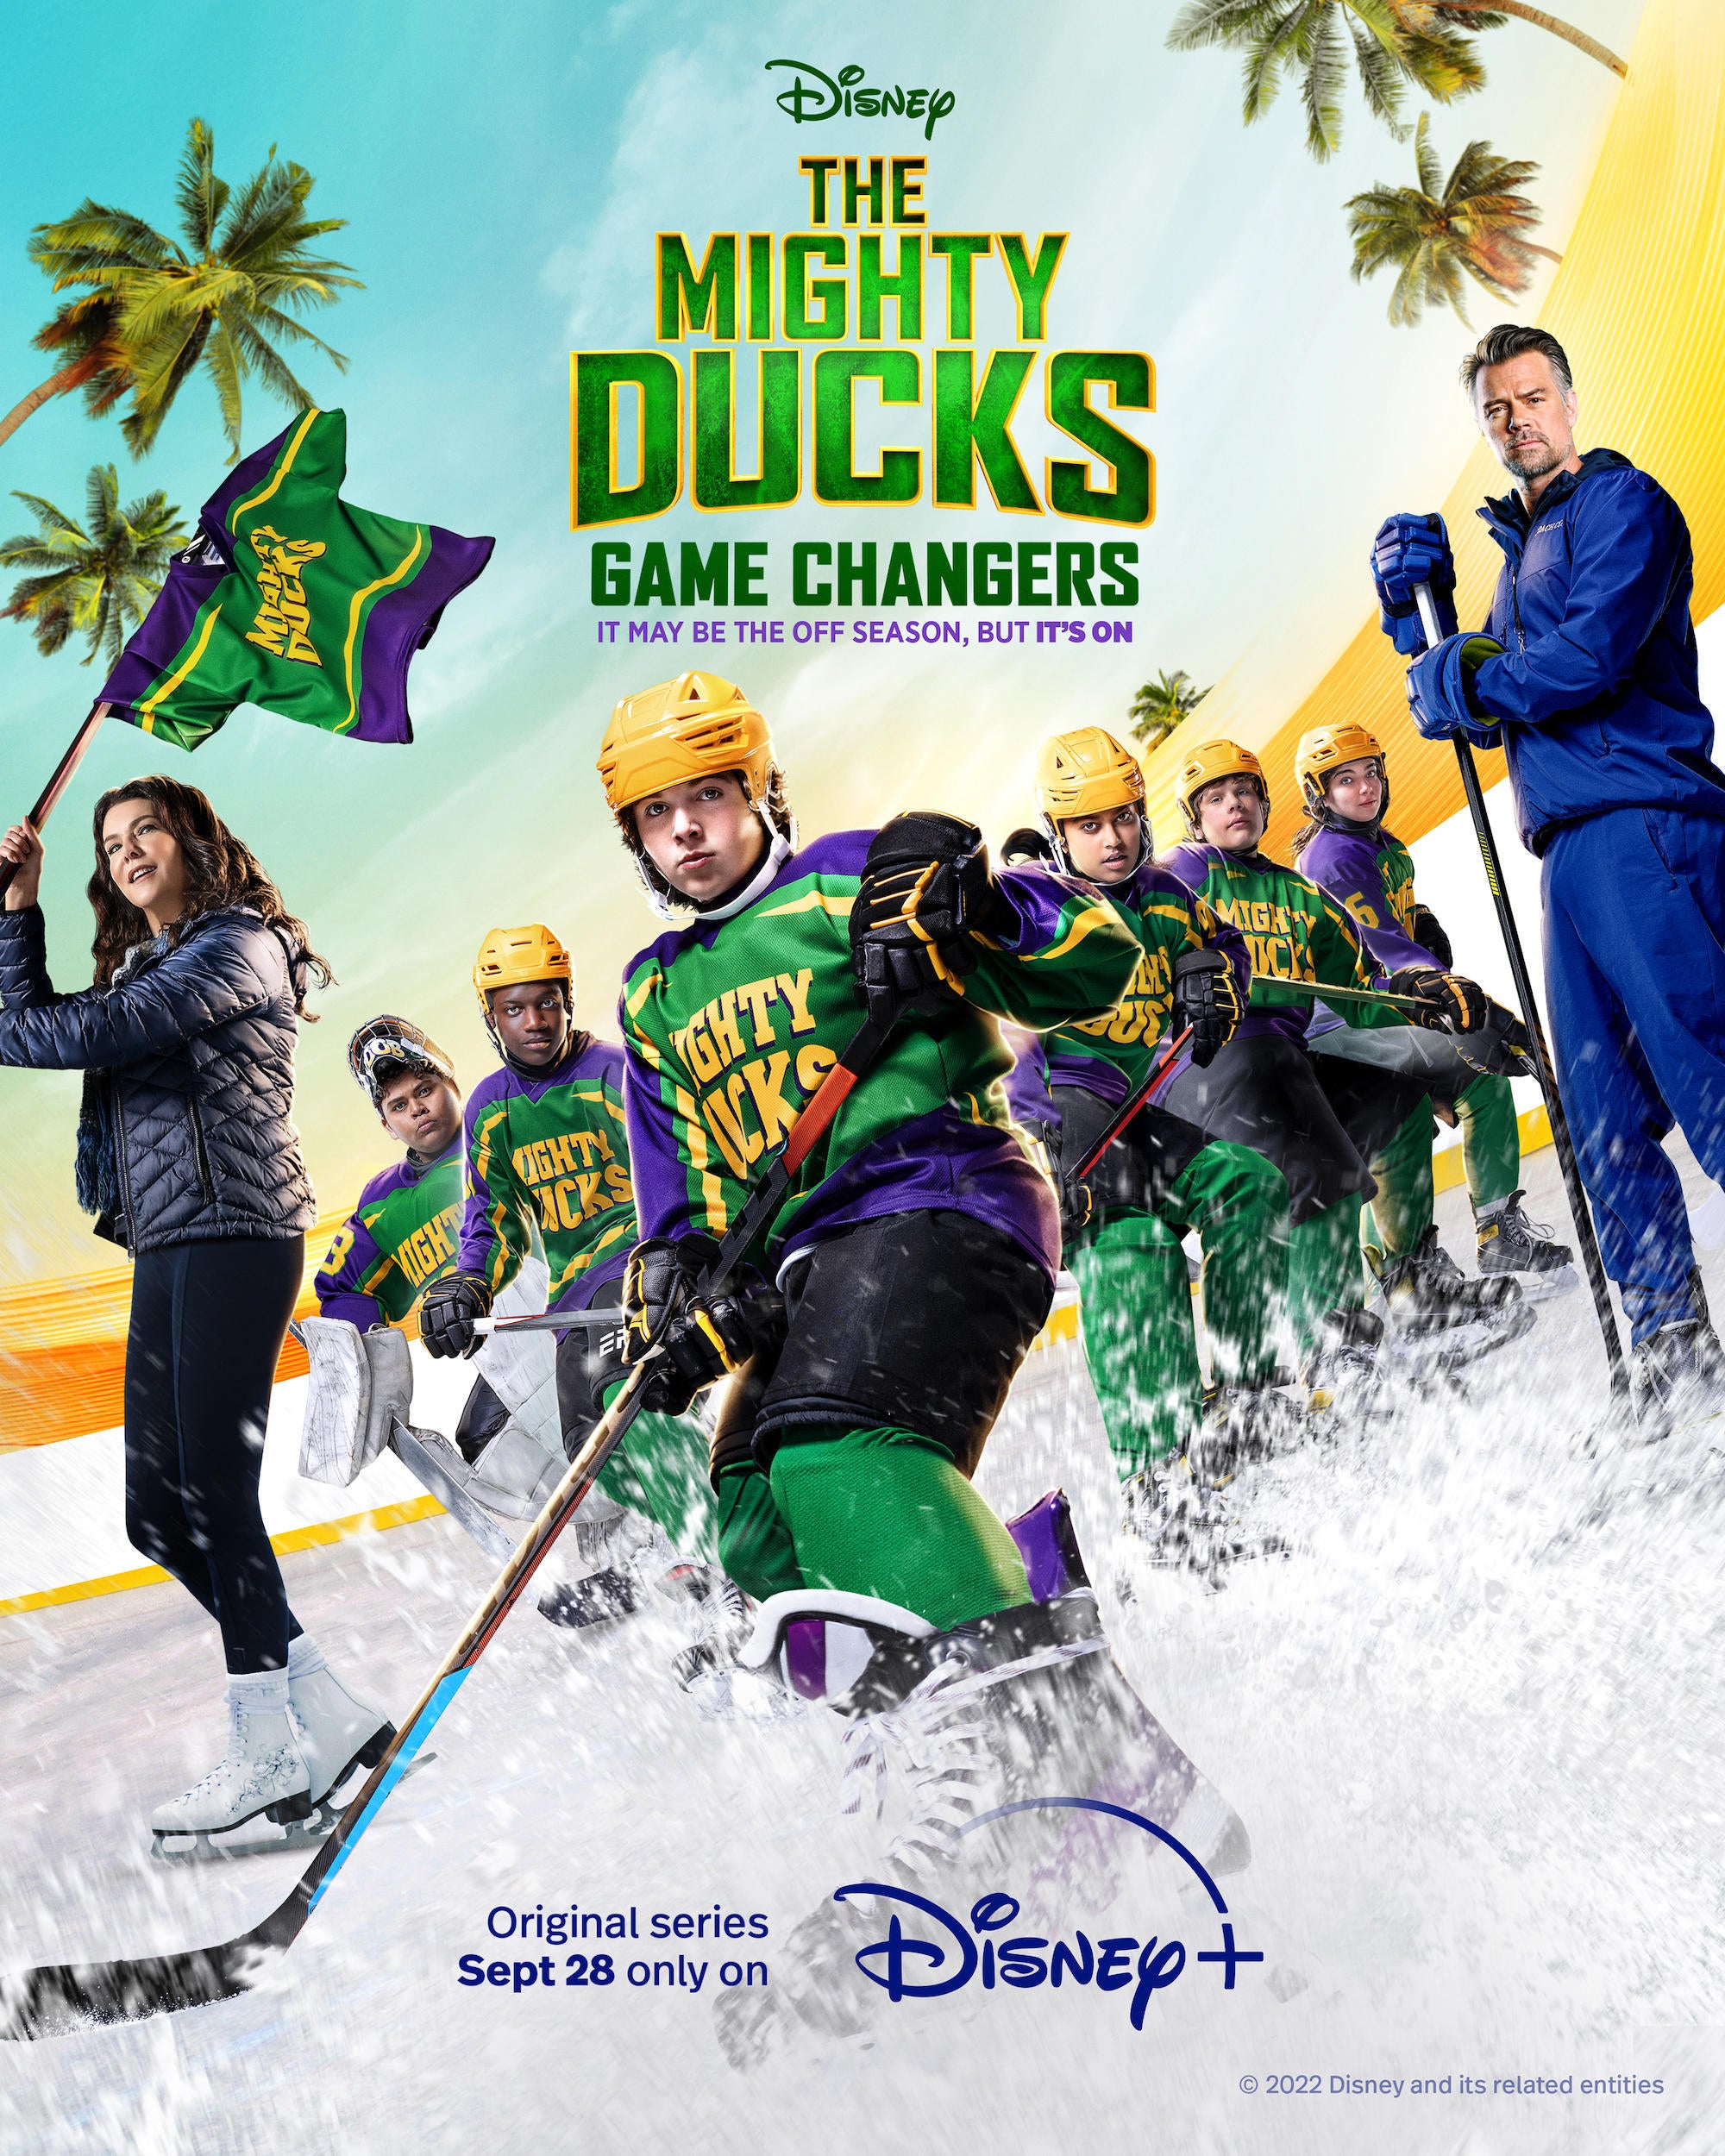 Disney+ Releases The Mighty Ducks Game Changers Season 2 Trailer